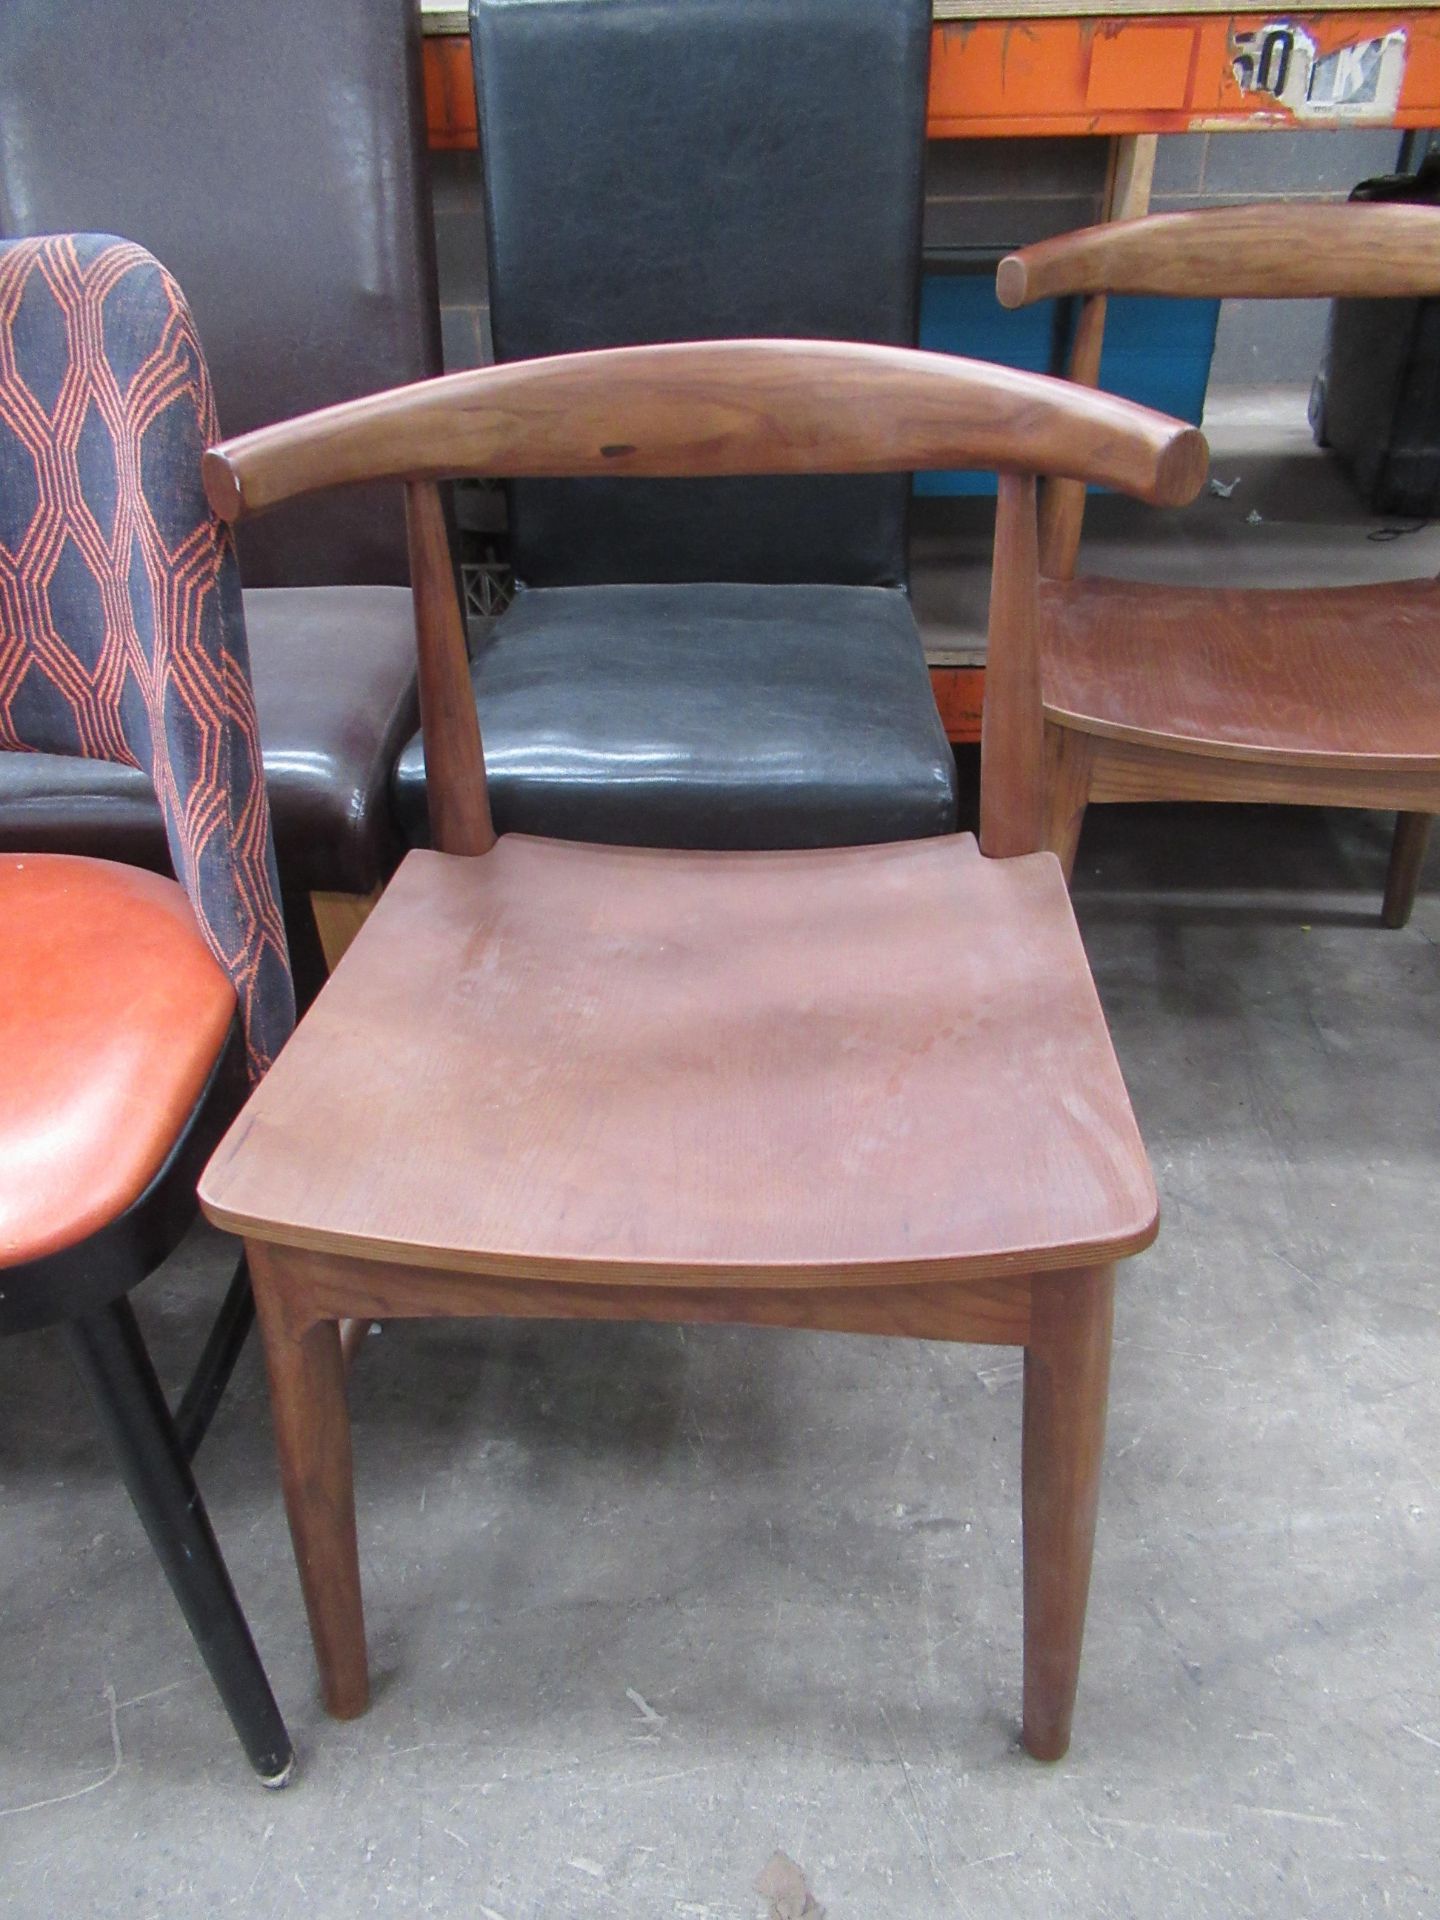 4x Matching Orange Chairs, 2x Matching Wooden Chairs and 5 Various - Image 3 of 4